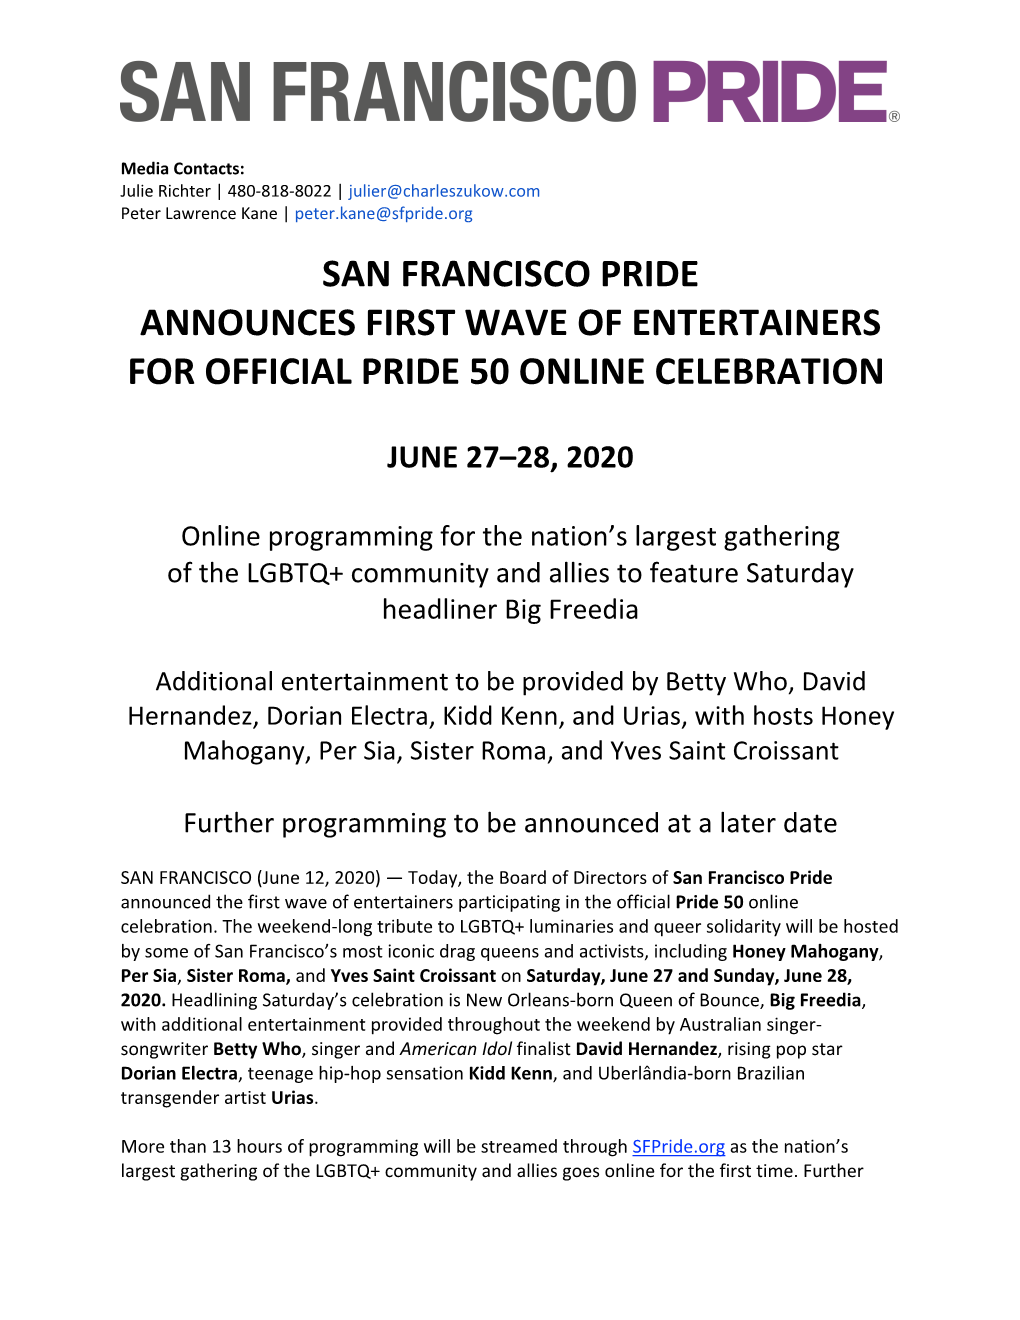 San Francisco Pride Announces First Wave of Entertainers for Official Pride 50 Online Celebration